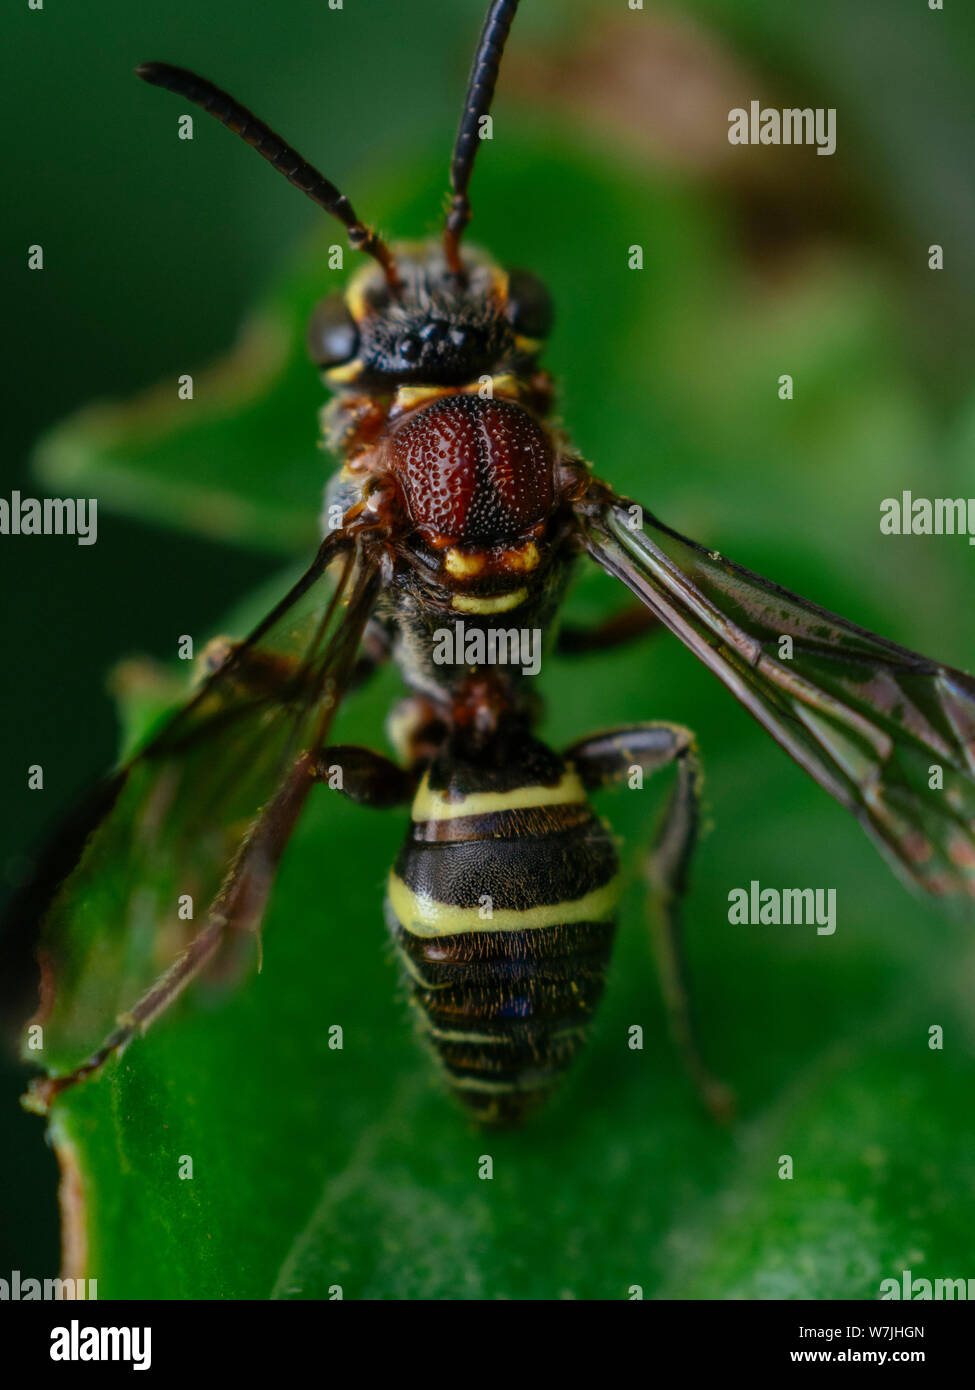 Small wasp-like bee from the Nomada genus, kleptoparasitoid of other bees, seen in a tropical garden in Brazil Stock Photo